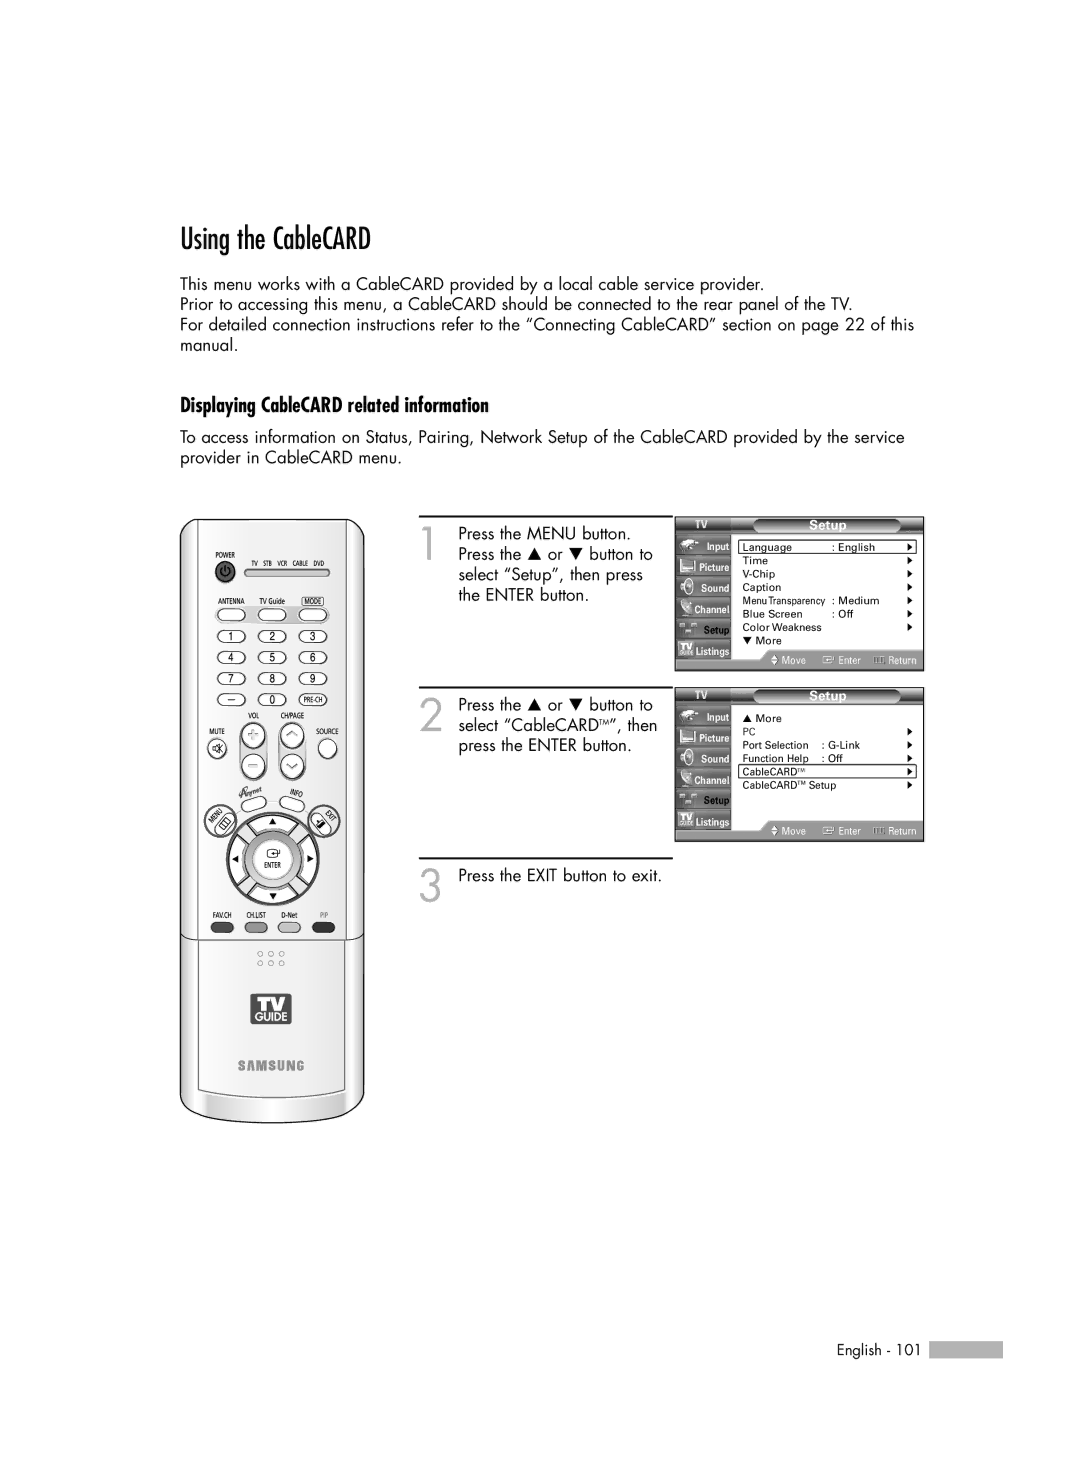 Samsung HL-R5667W, HL-R6167W, HL-R5067W manual Using the CableCARD, Displaying CableCARD related information 